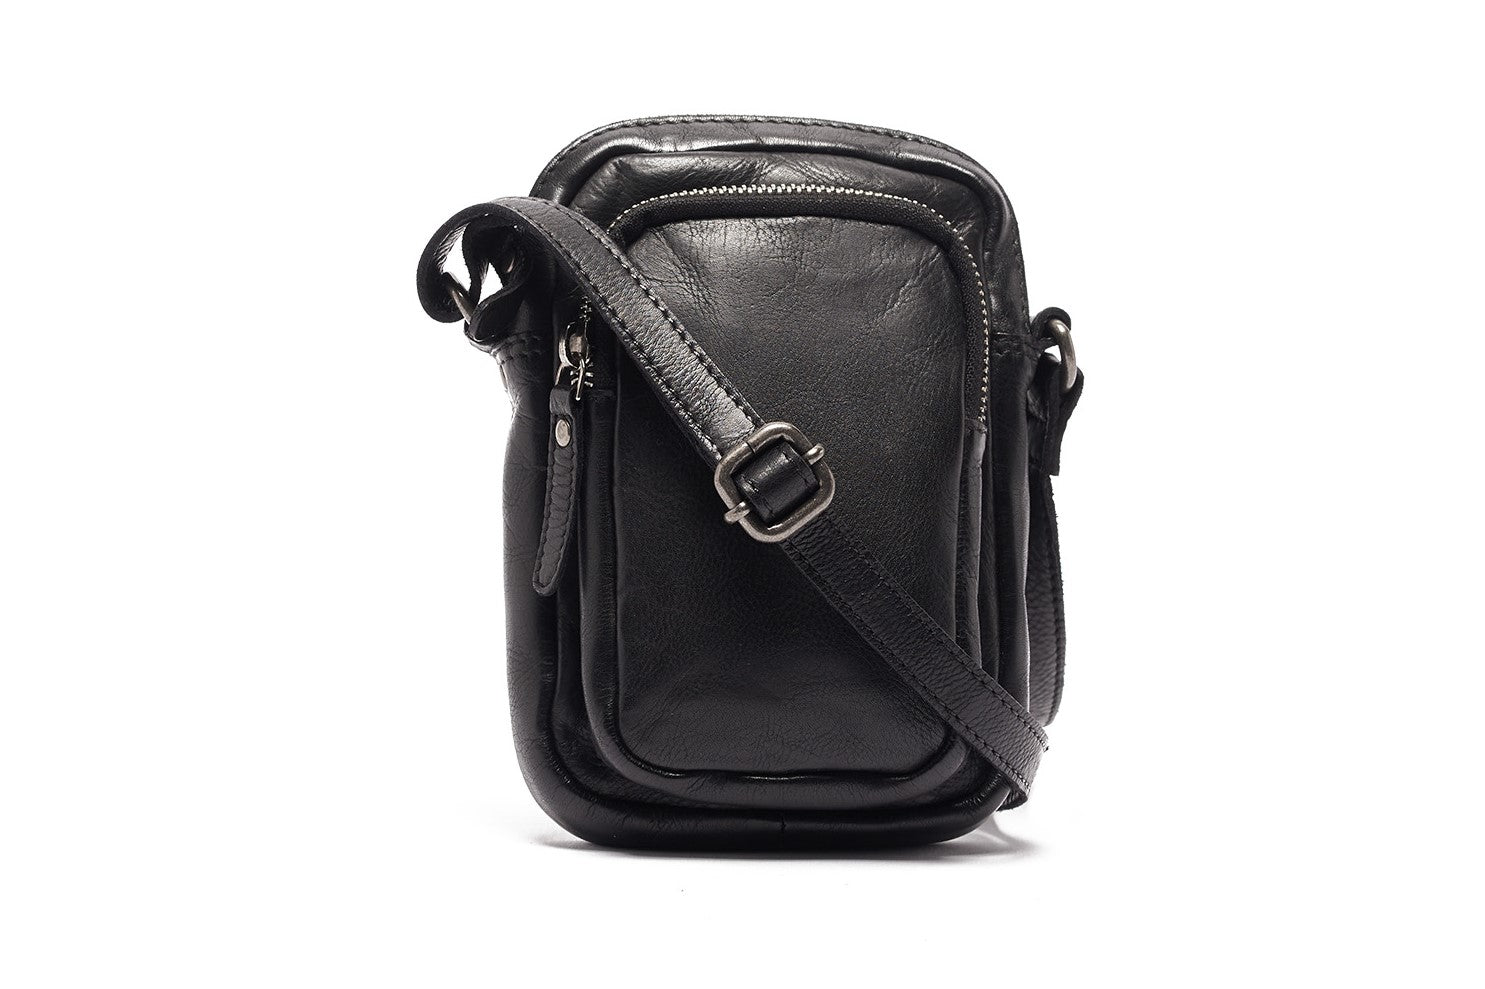 Rugged Hide - Hailey compact leather crossbody